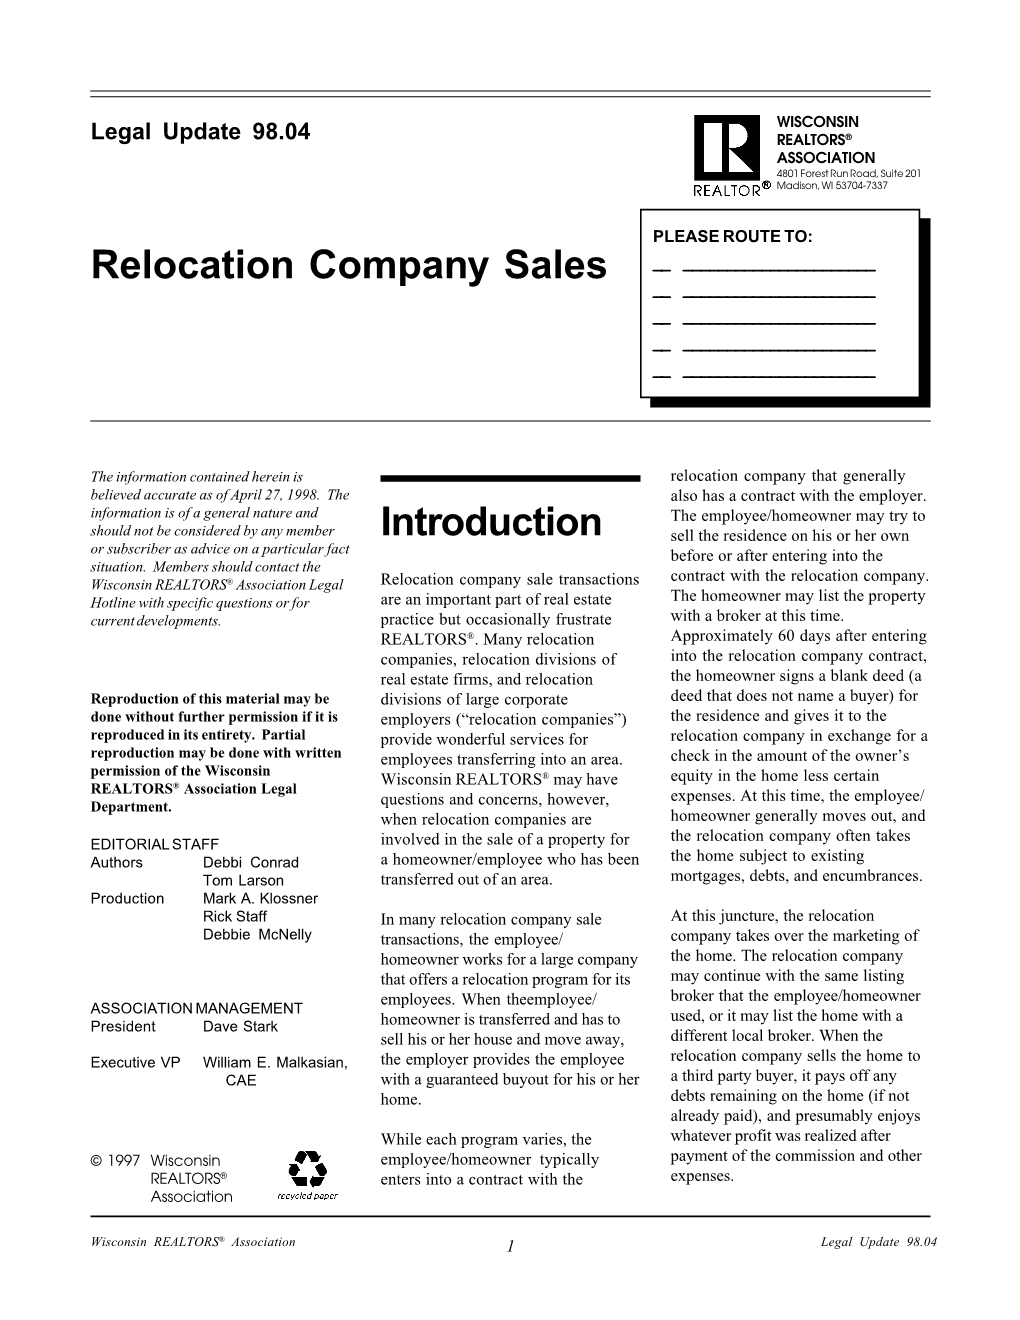 Relocation Company Sales Introduction